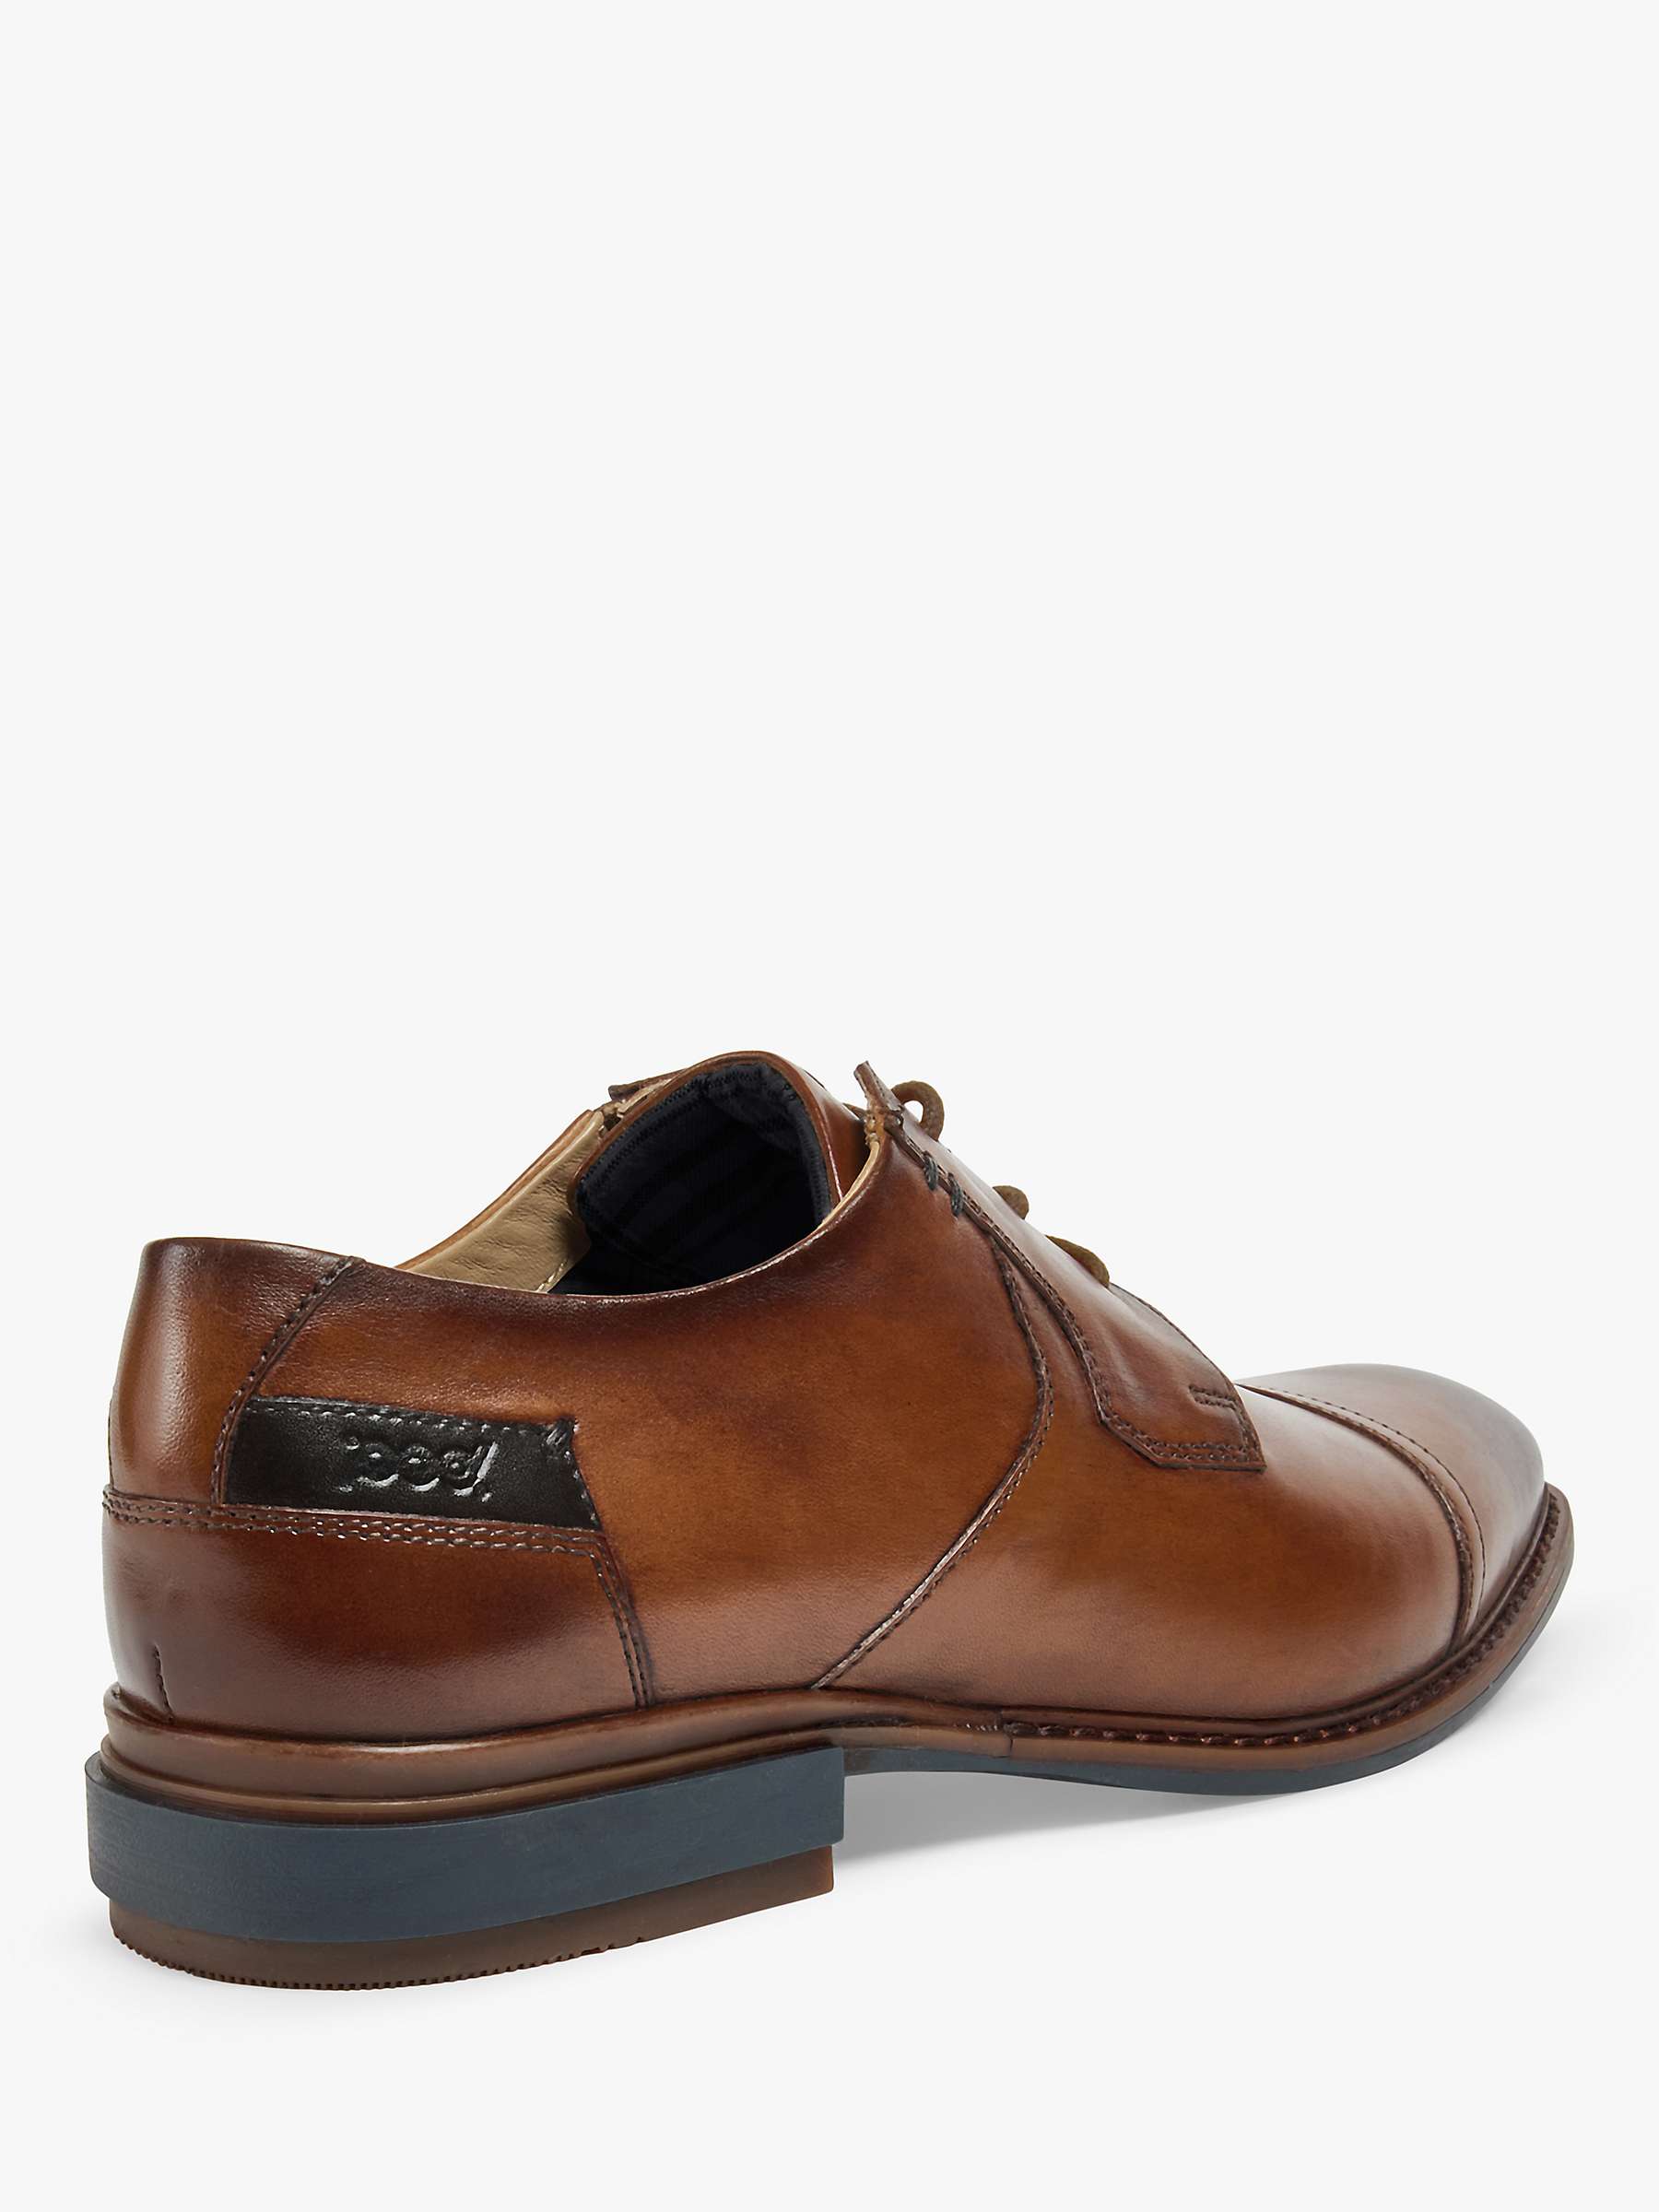 Buy Pod Savage Smart Lace Up Leather Shoes Online at johnlewis.com